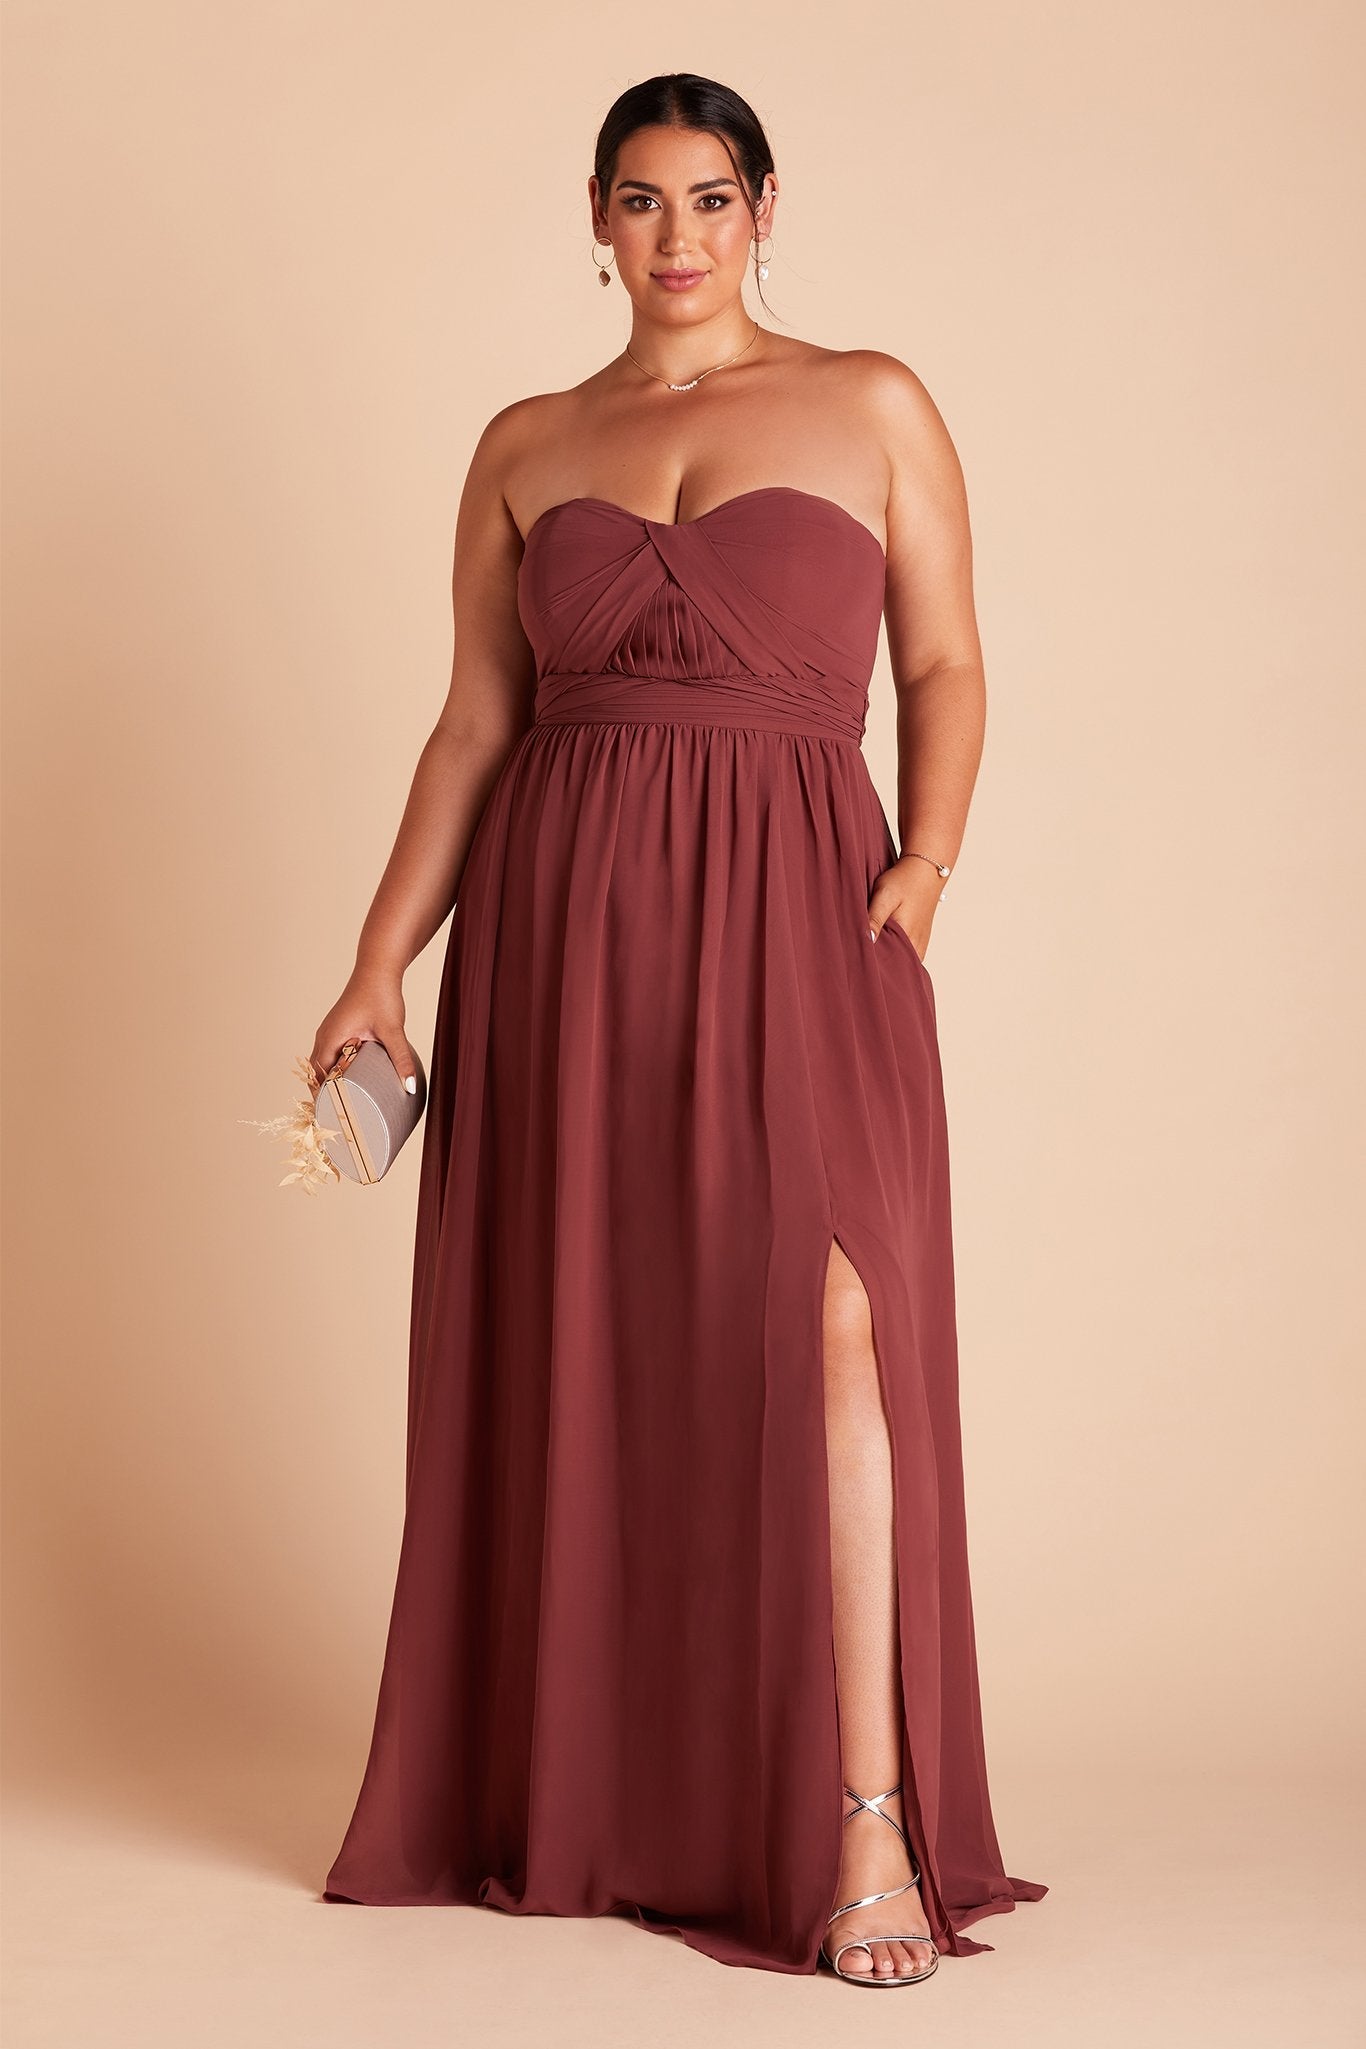 Grace convertible plus size bridesmaid dress with slit in rosewood chiffon by Birdy Grey, front view with hand in pocket